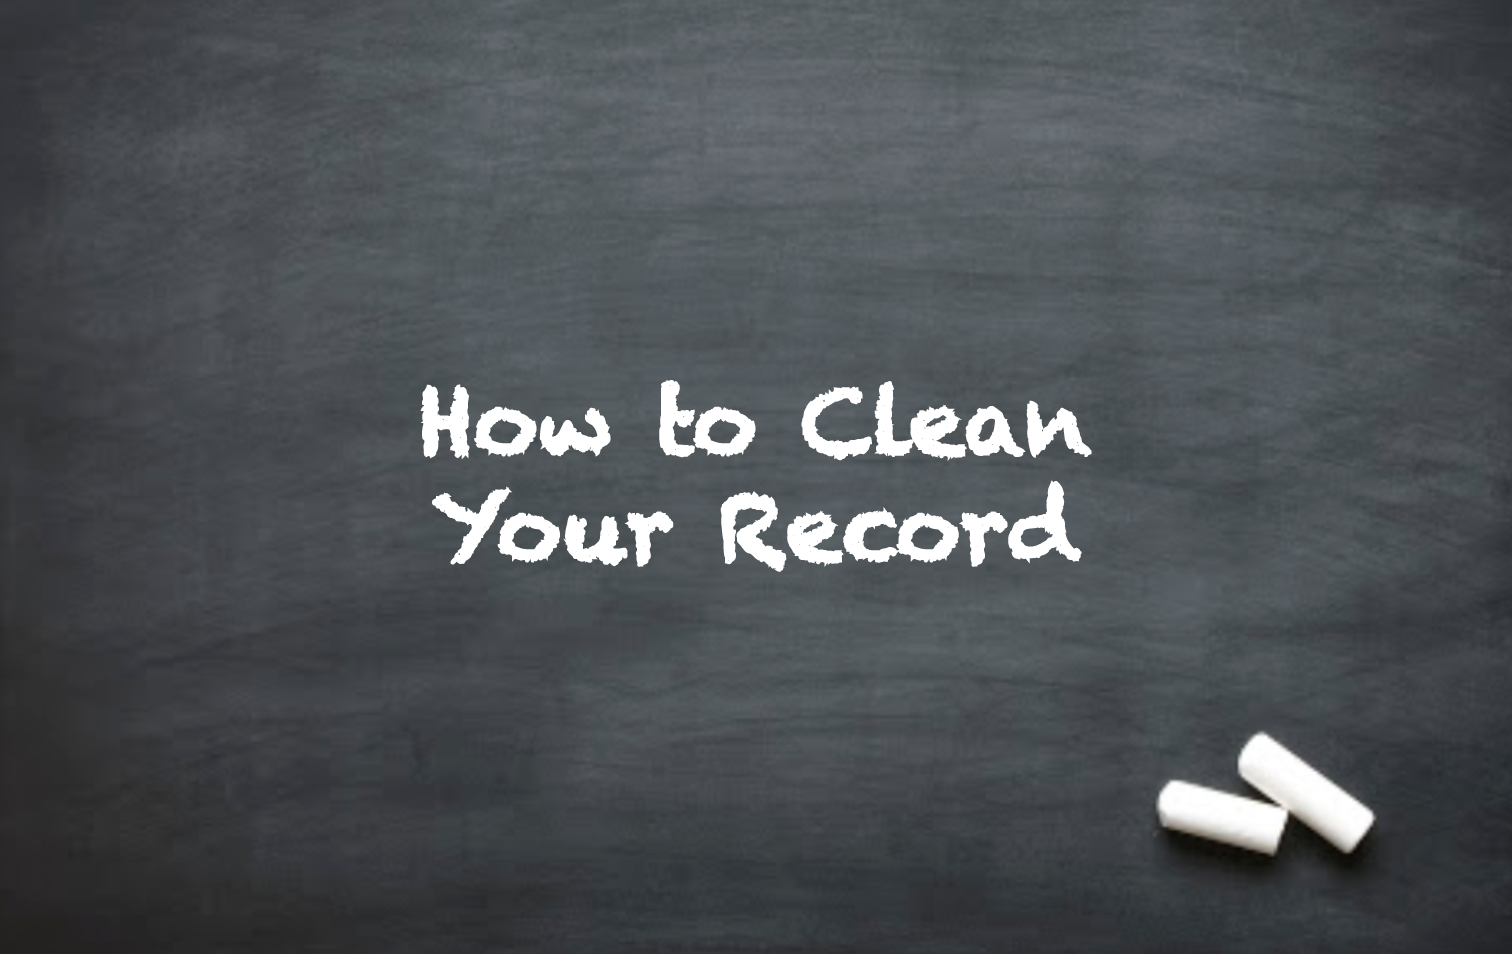 How to Clean Your Record